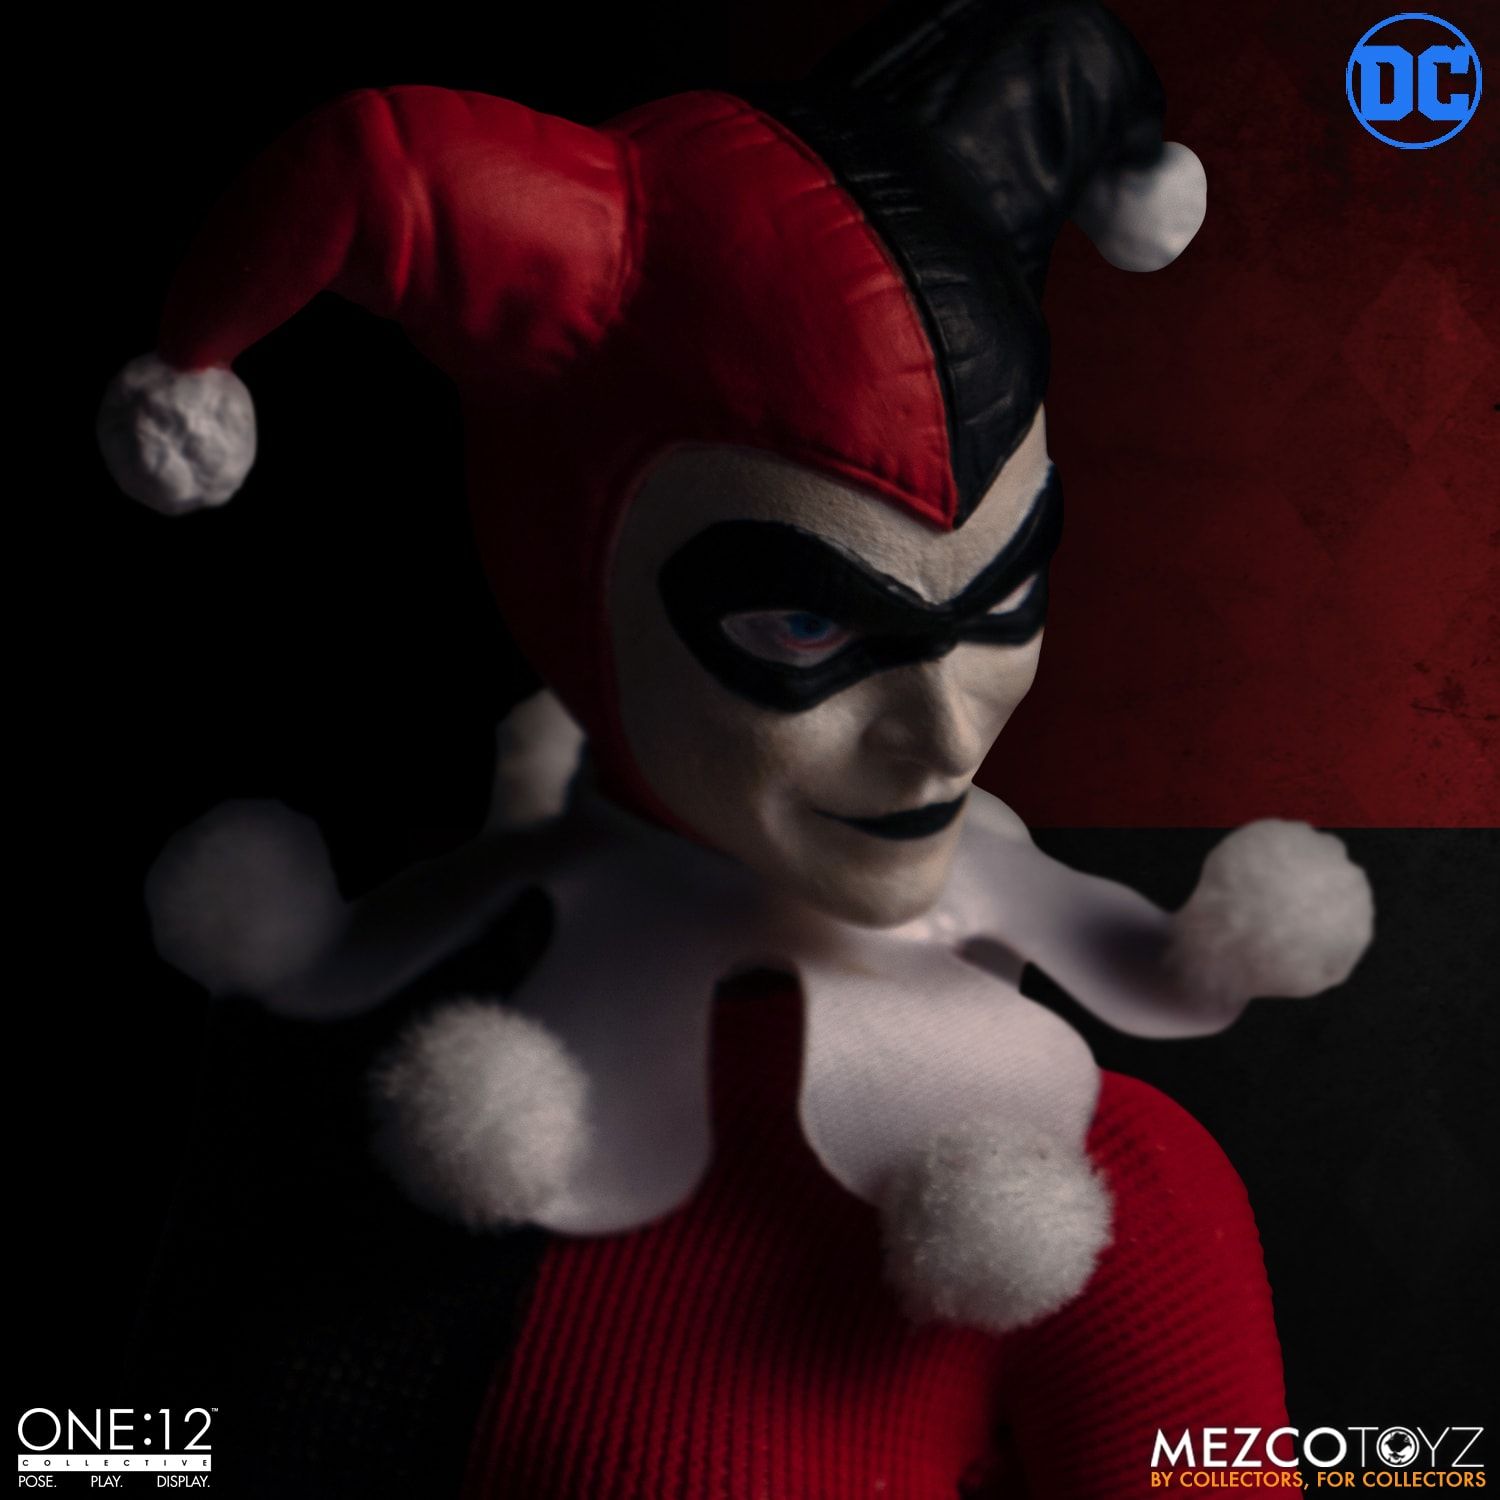 Mezco 1:12 Harley Quinn Deluxe PREORDER Expected Q1/2 & Will Ship IMMEDIATELY!! 